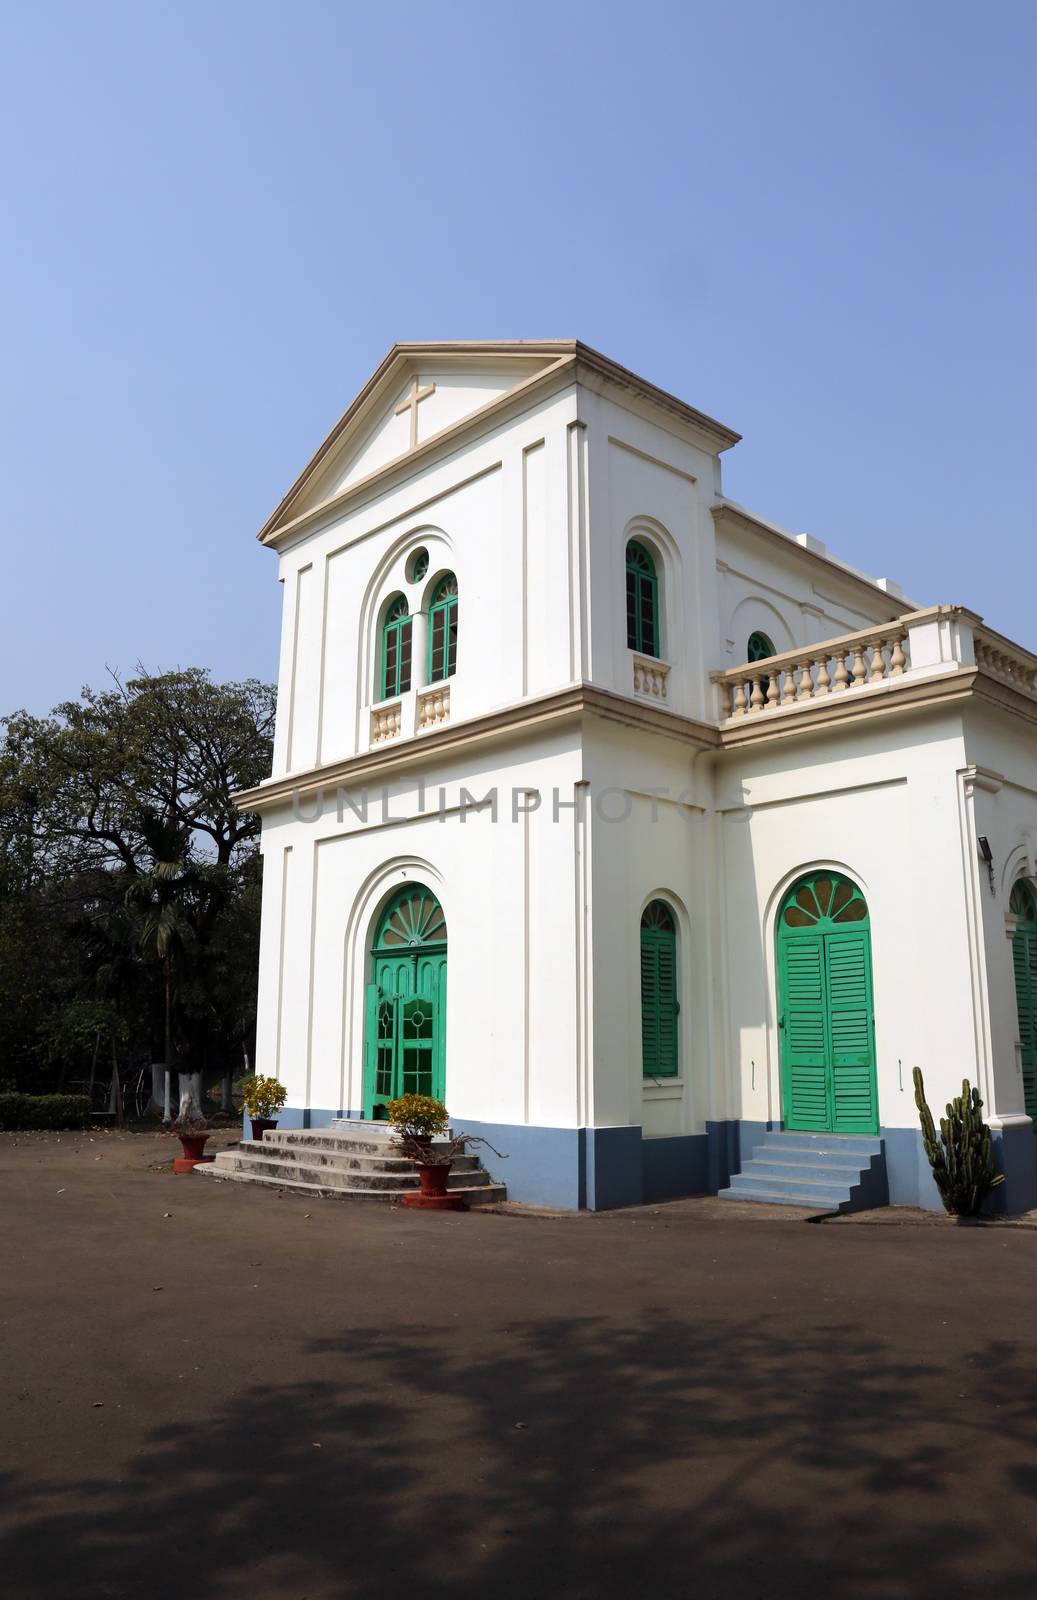 Church in Loreto Convent where Mother Teresa lived before the founding of the Missionaries of Charity in Kolkata, India